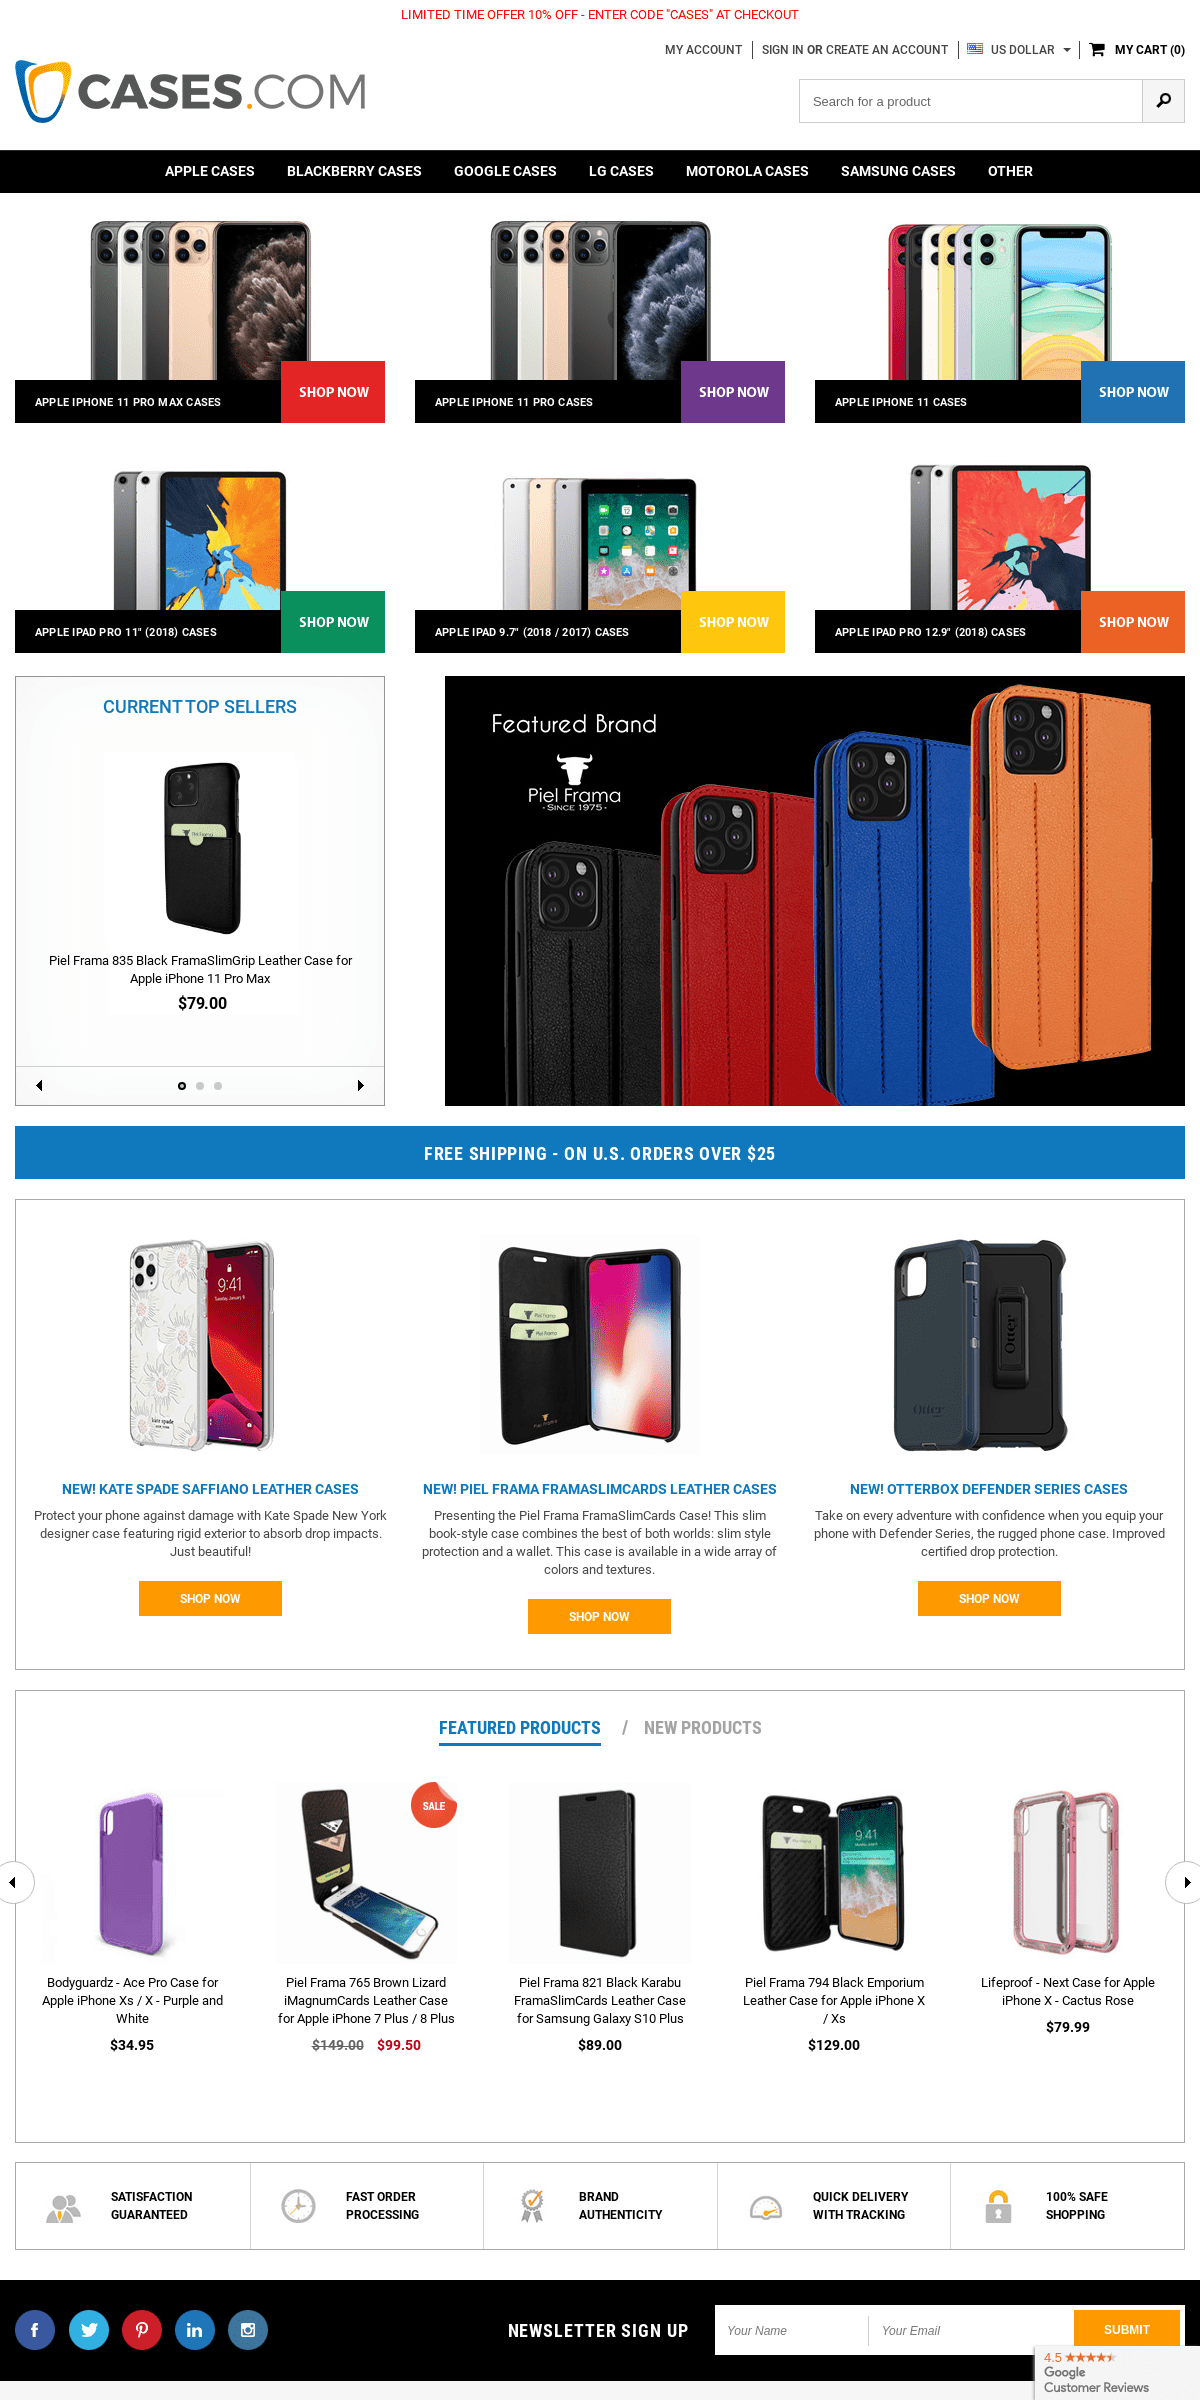 A complete backup of cases.com